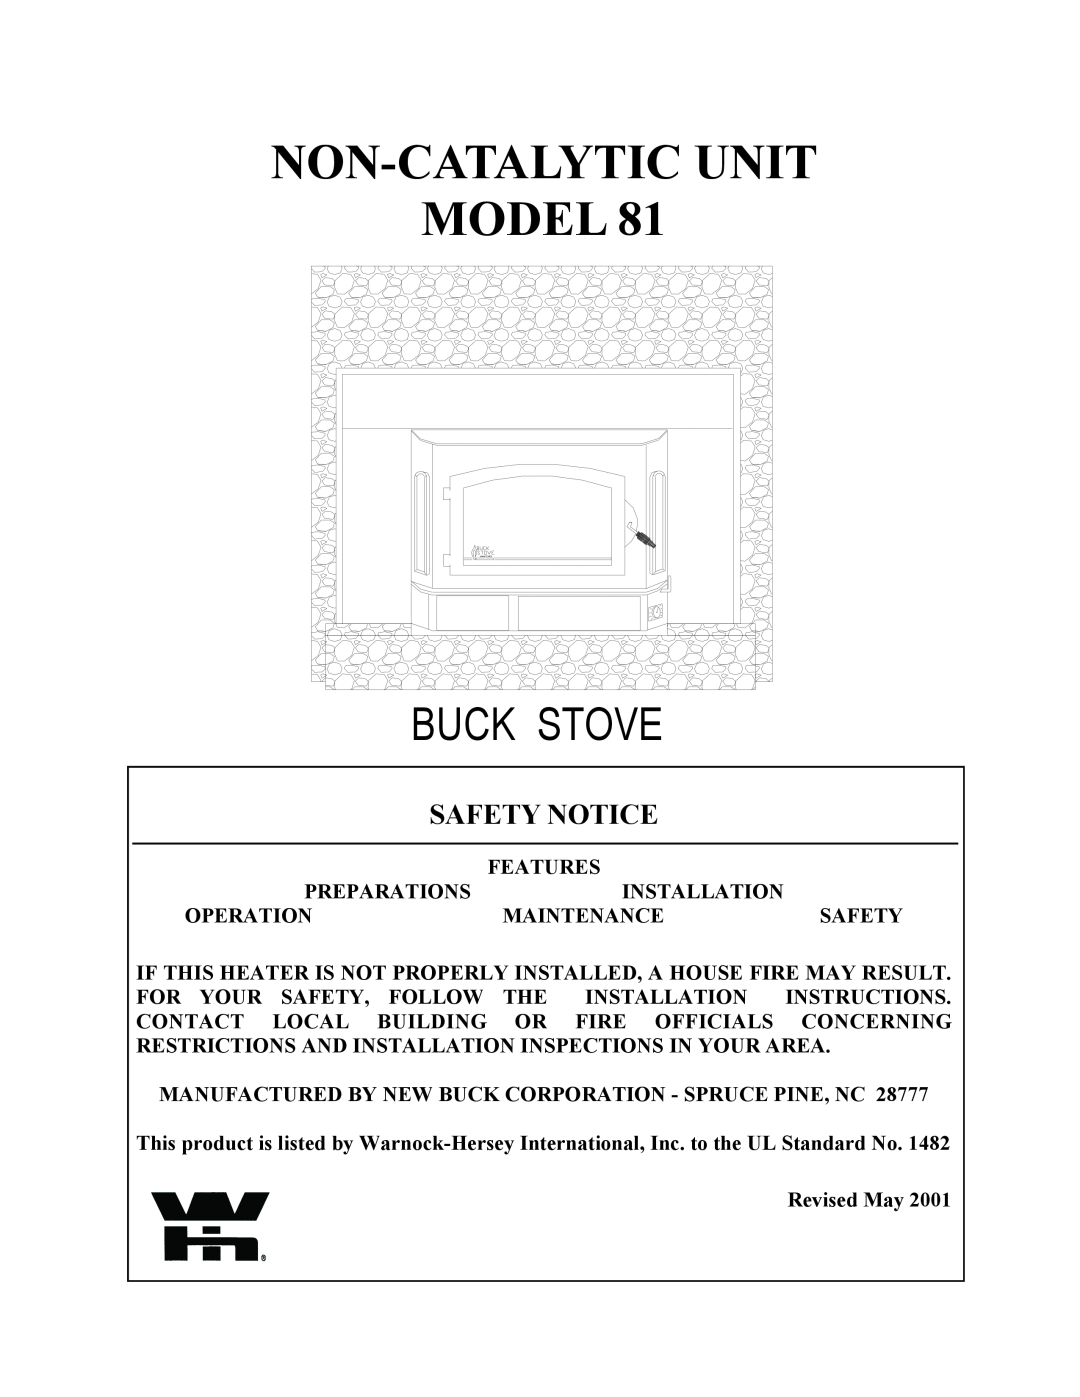 New Buck Corporation 81 installation instructions Fireplace Insert & Freestanding, Safety Notice, Model Non-Catalyticunit 